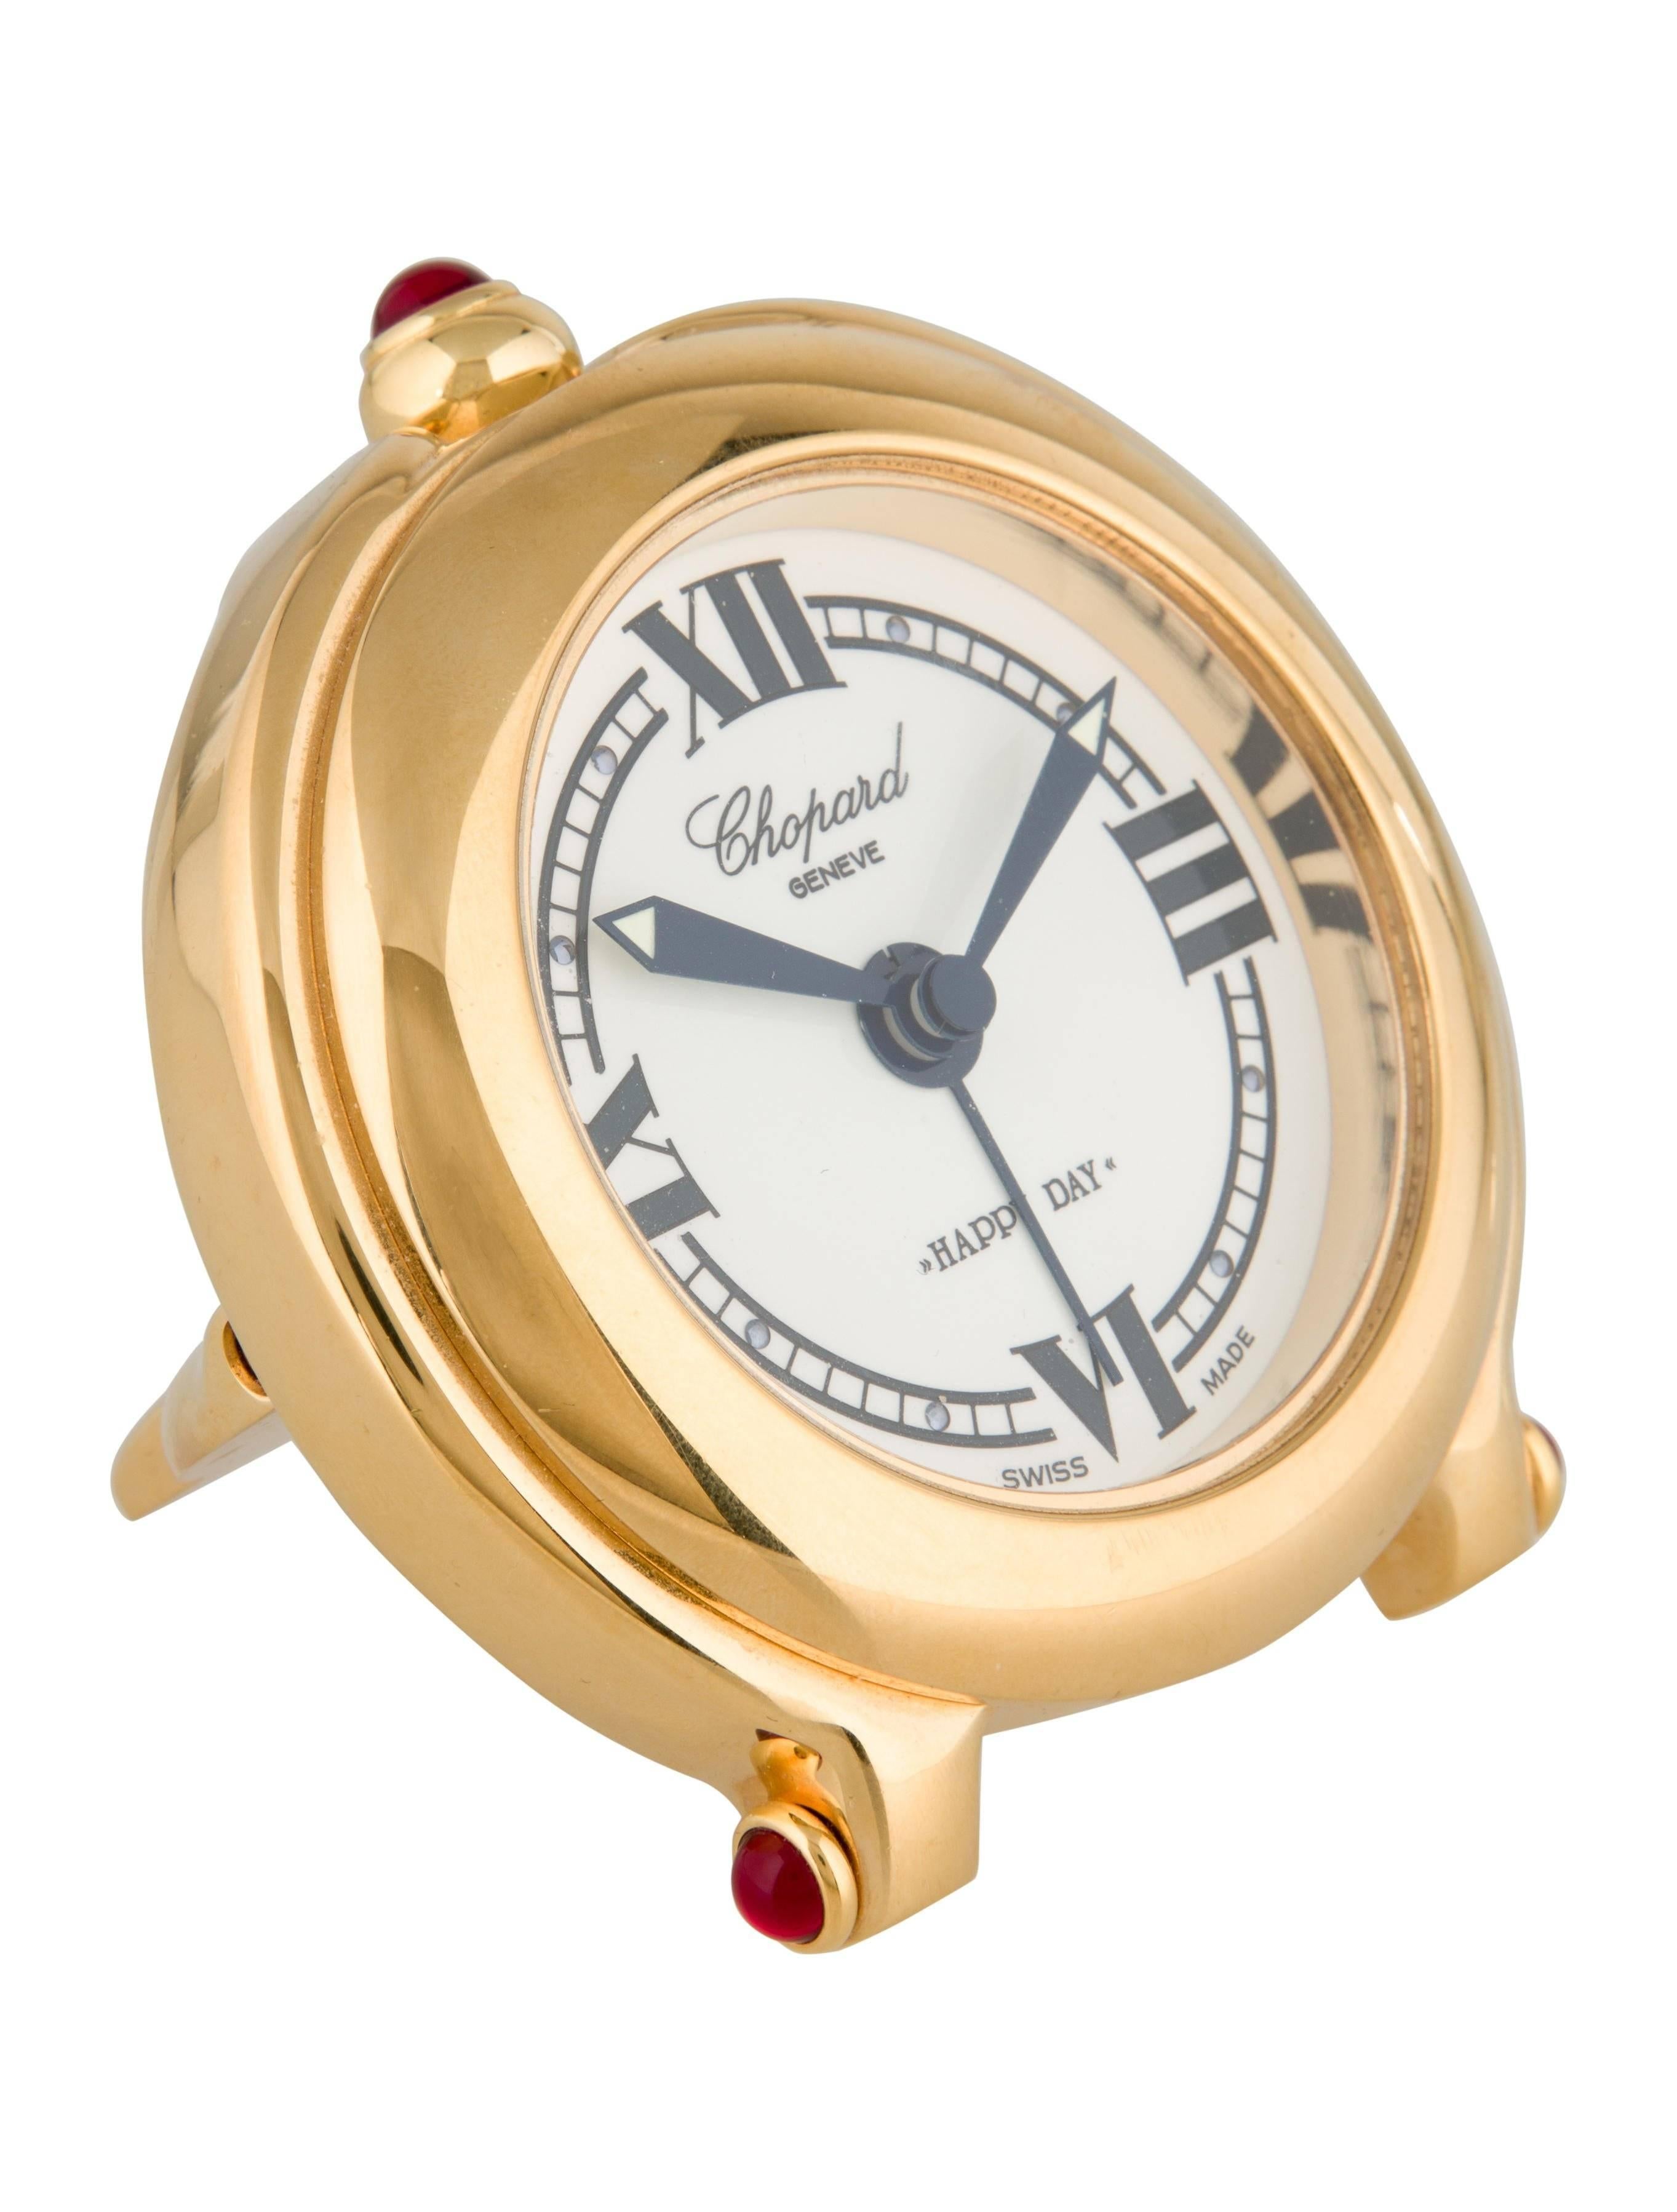 CURATOR'S NOTES

Chopard Gold Tone Men's Decor Travel Table Desk Alarm Clock 

Stainless steel
Gold tone
Quartz movement
Features alarm setting
Swiss made
Measures 3" W x 3.5" H x 1" D 
